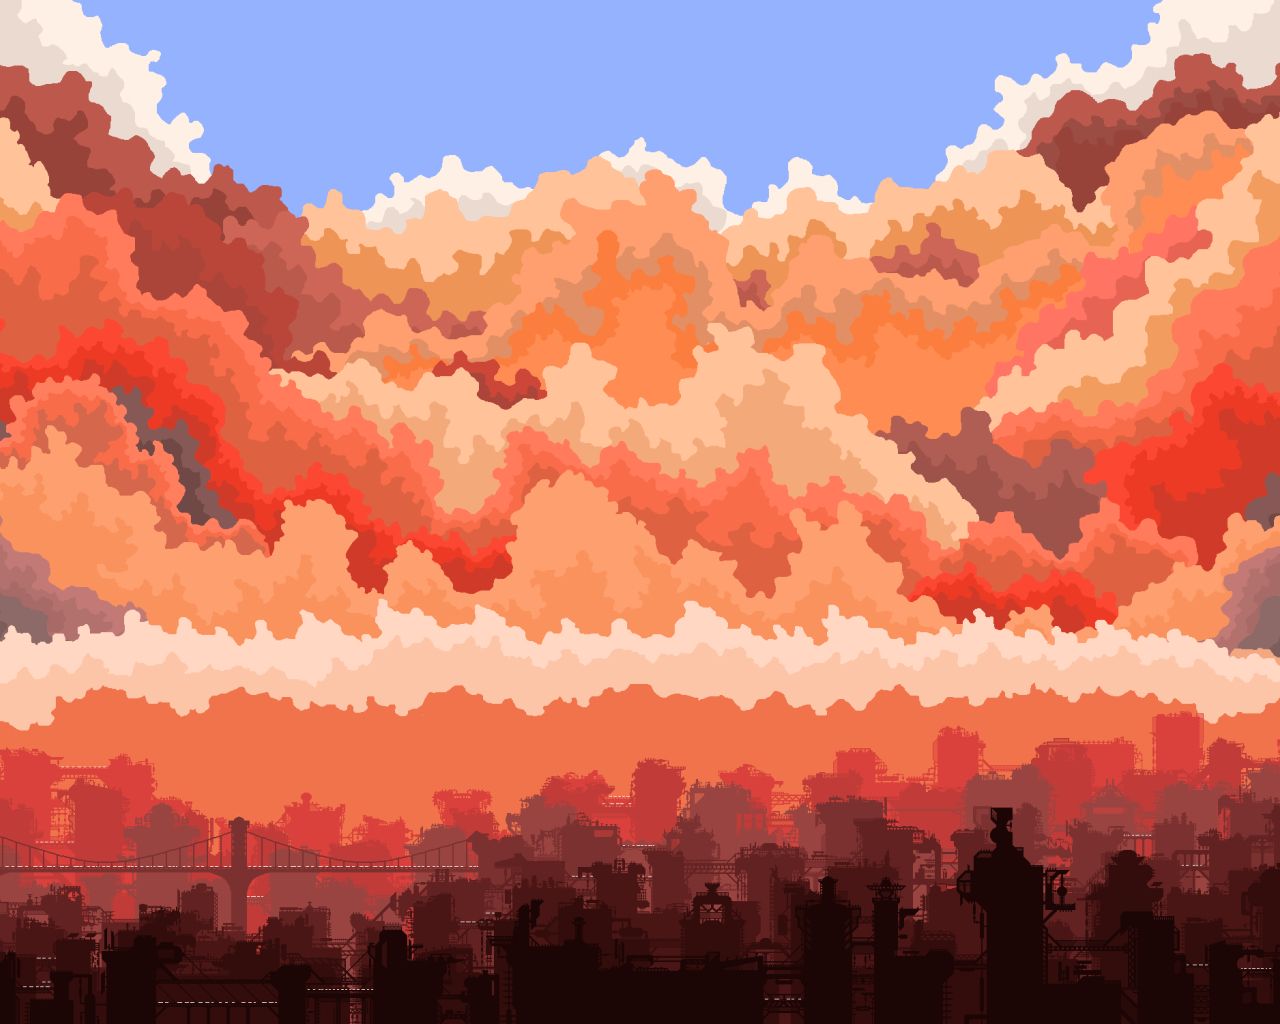 A city skyline with clouds in the background - 1280x1024